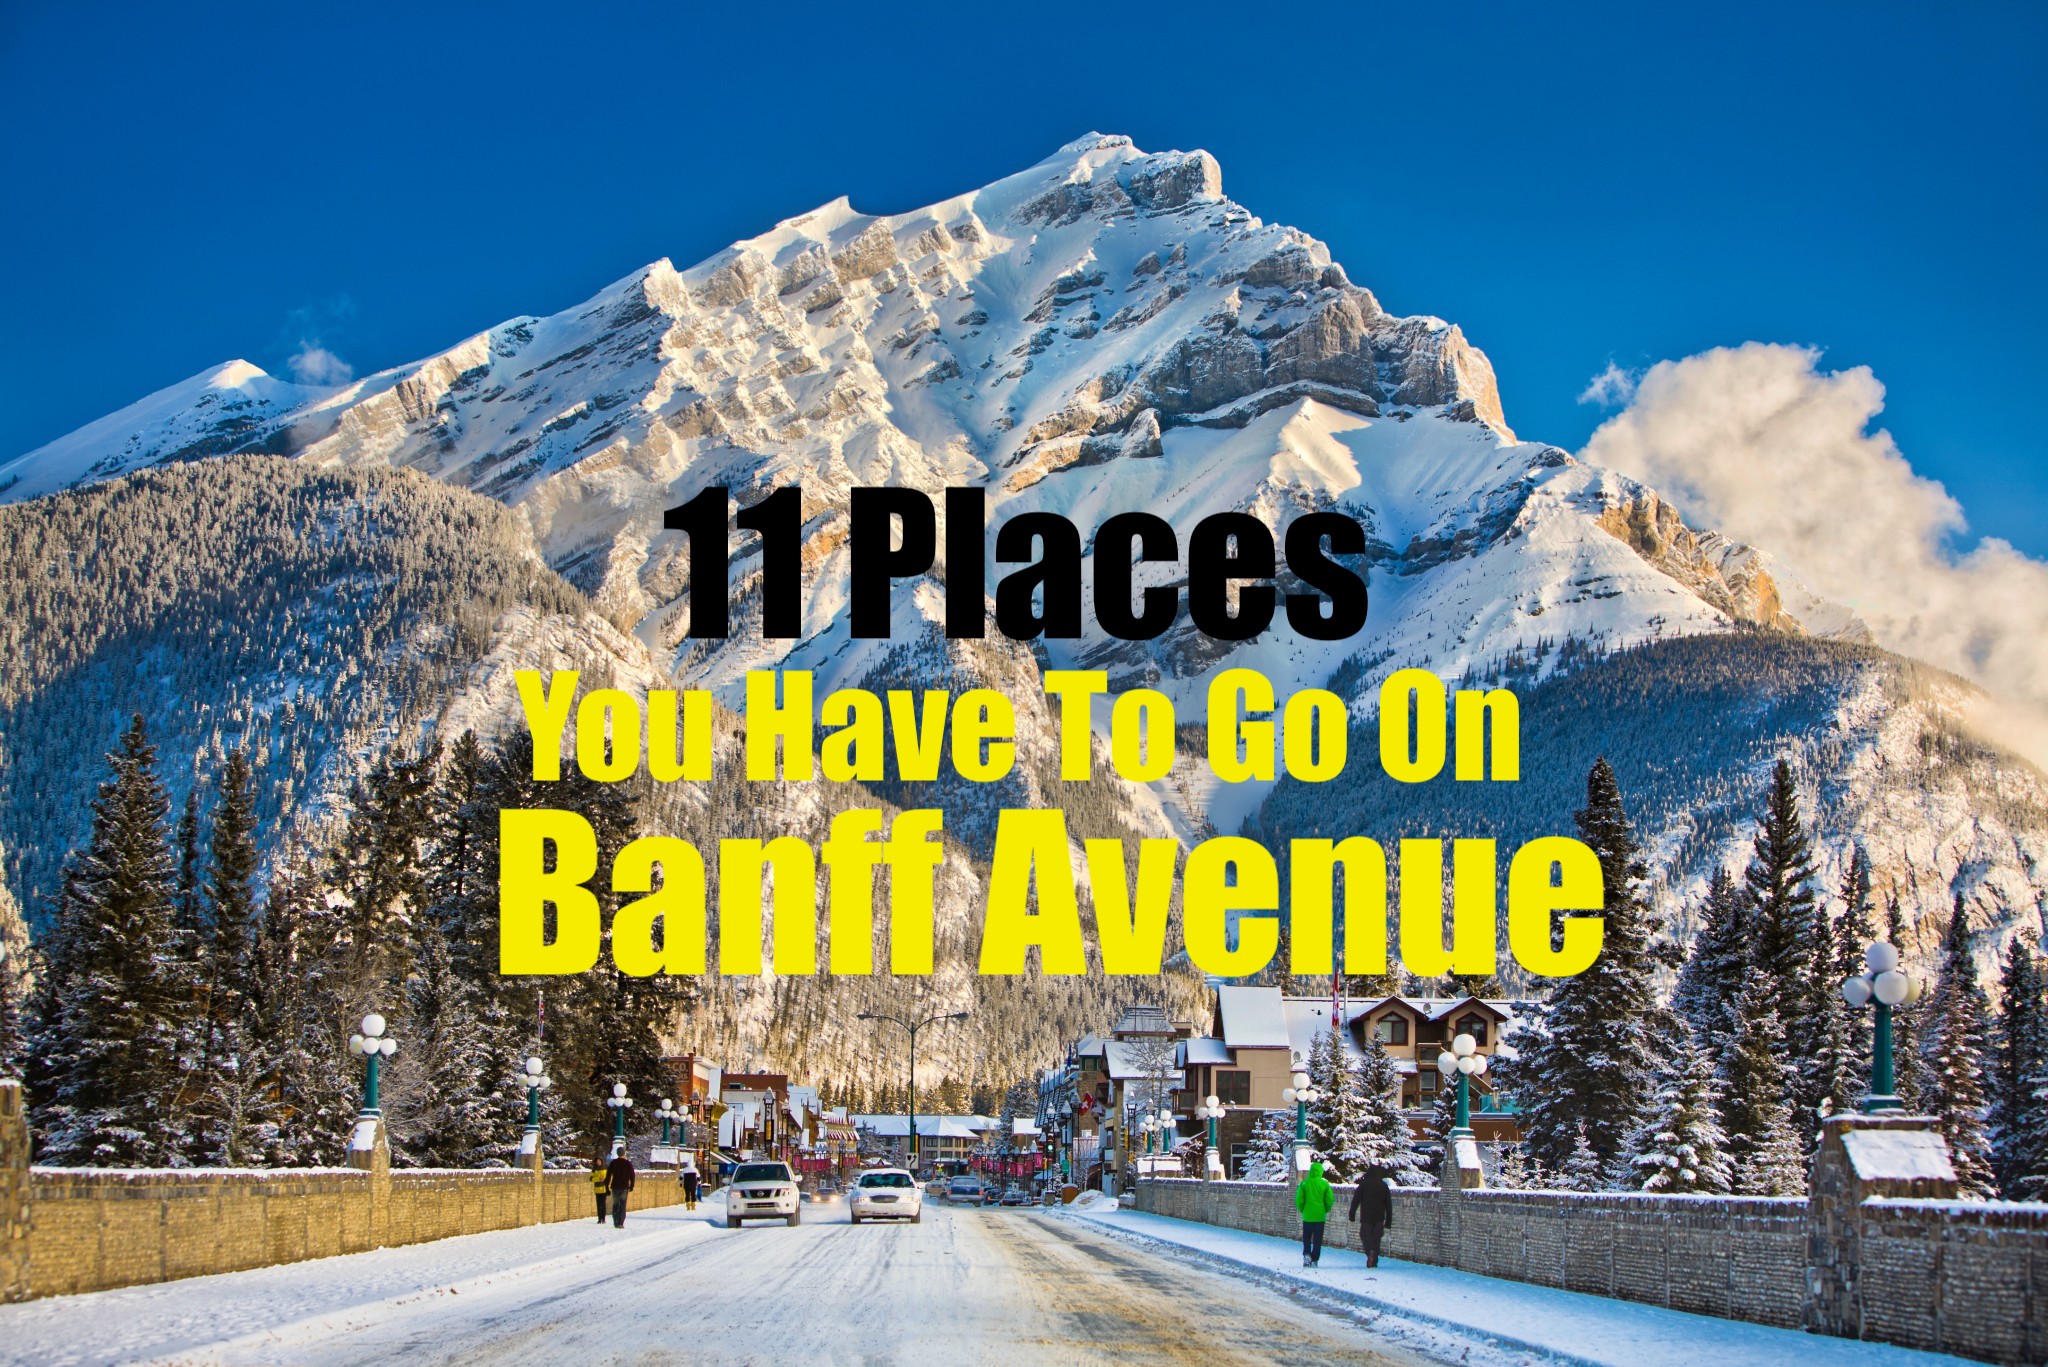 11 Places You Have to Go On Banff Ave